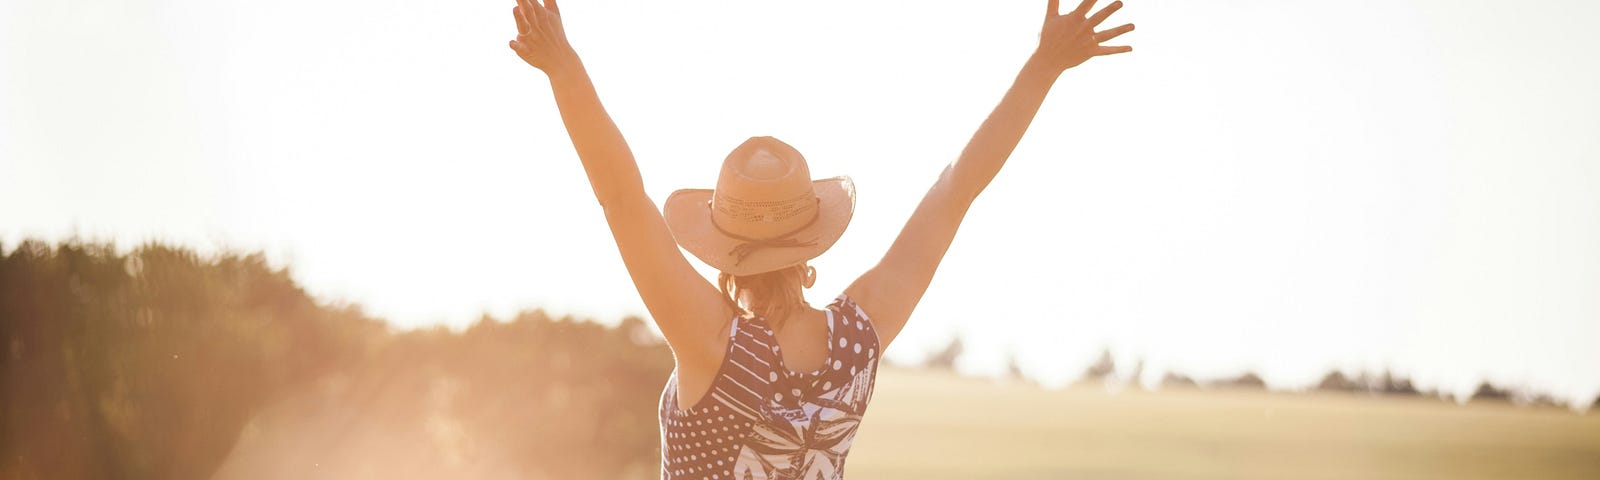 A person wearing a sunhat and dress with arms outstretched upwards in a sunlit field, embodying the feeking of freedom